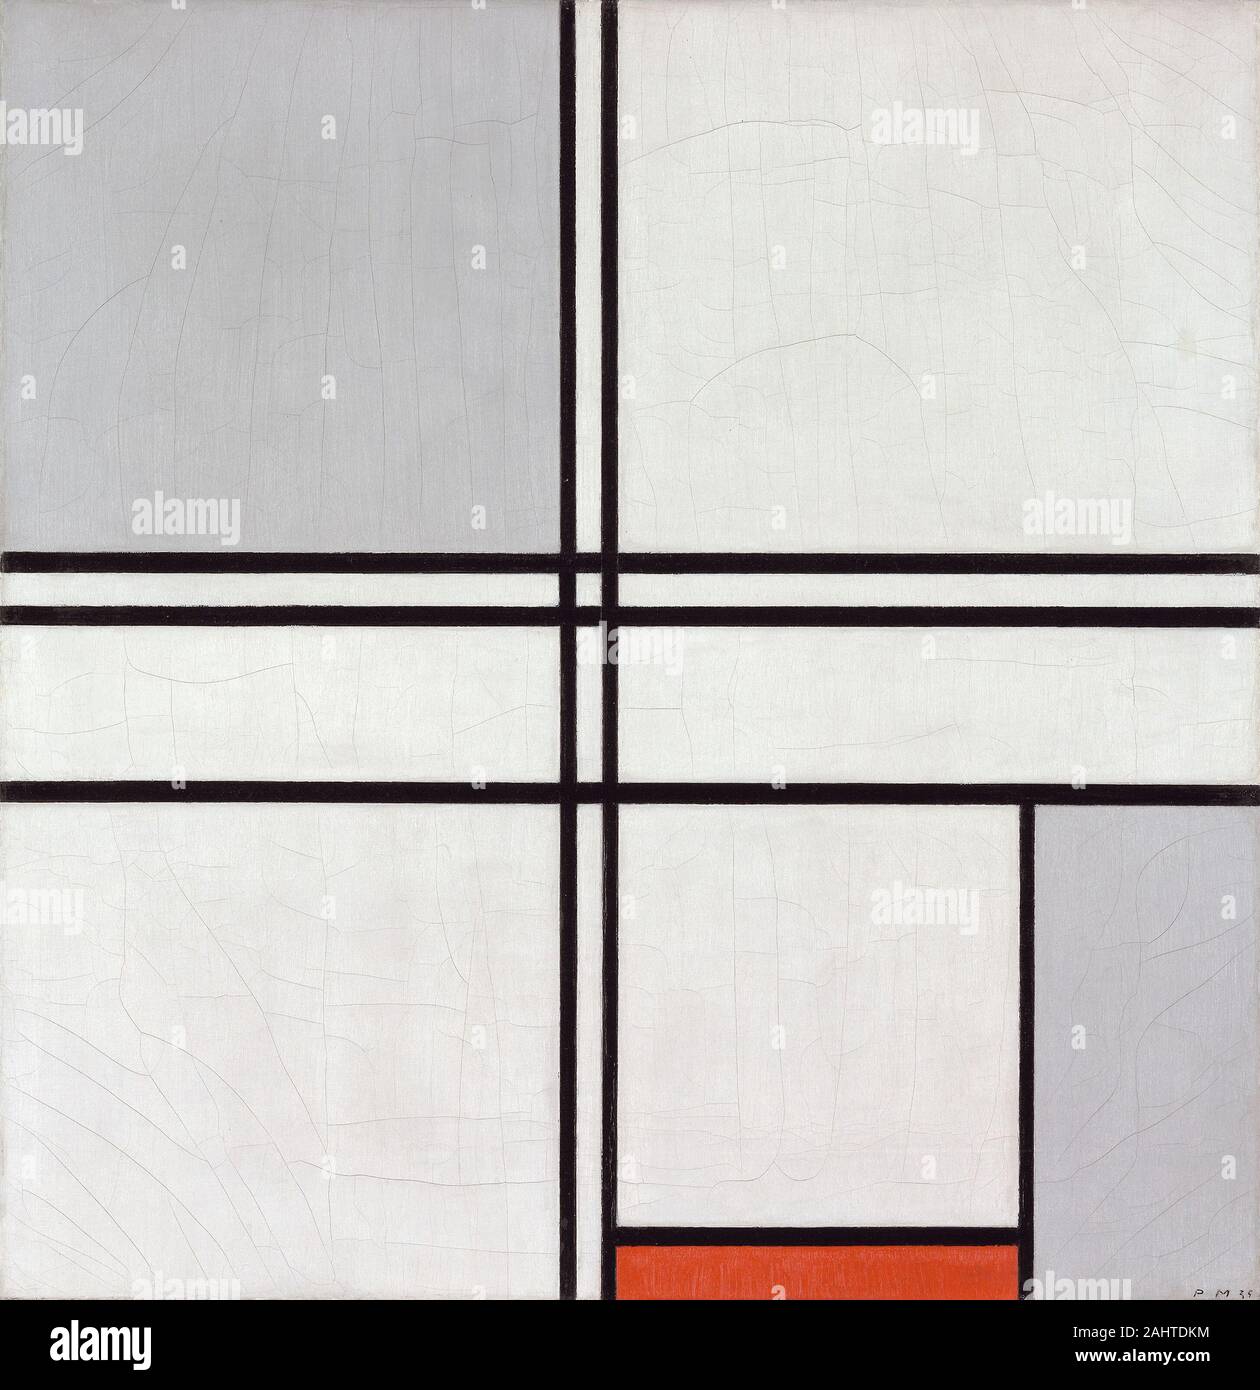 Piet Mondrian. Composition (No. 1) Gray-Red. 1935. Netherlands. Oil on canvas The roots of 20th-century abstract art can be traced to the late 19th century, when artists began to move away from the direct representation of objects toward the communication of emotional states or moods. In doing so, the formal properties of art—such visual elements as line, color, and composition—assumed a primary role in its production. After World War I, many artists, including Piet Mondrian, believed that abstract art could contribute to a more harmonious society by communicating in a universal, visual langua Stock Photo